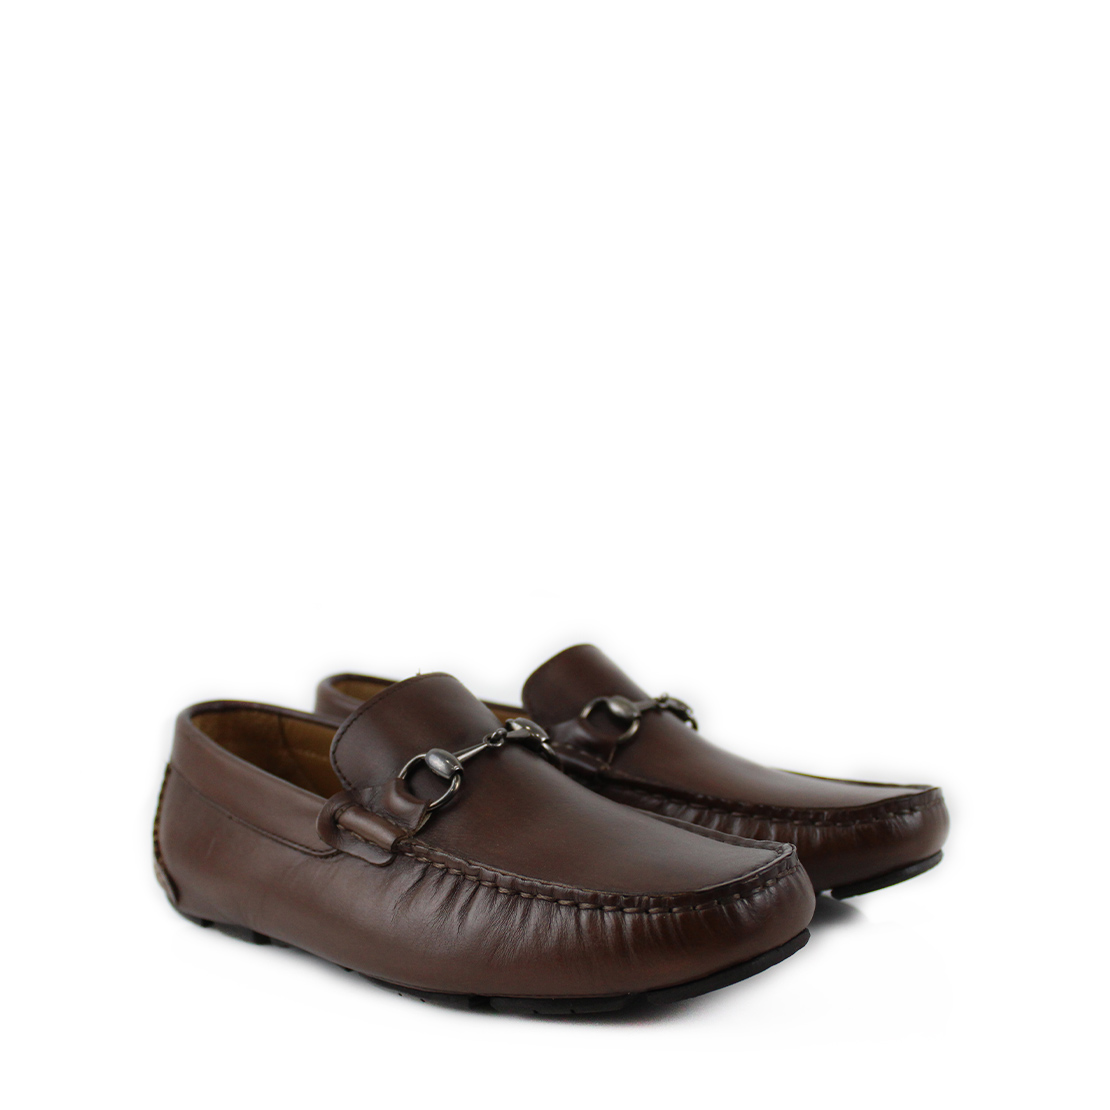 moccasins in leather brown with buckle